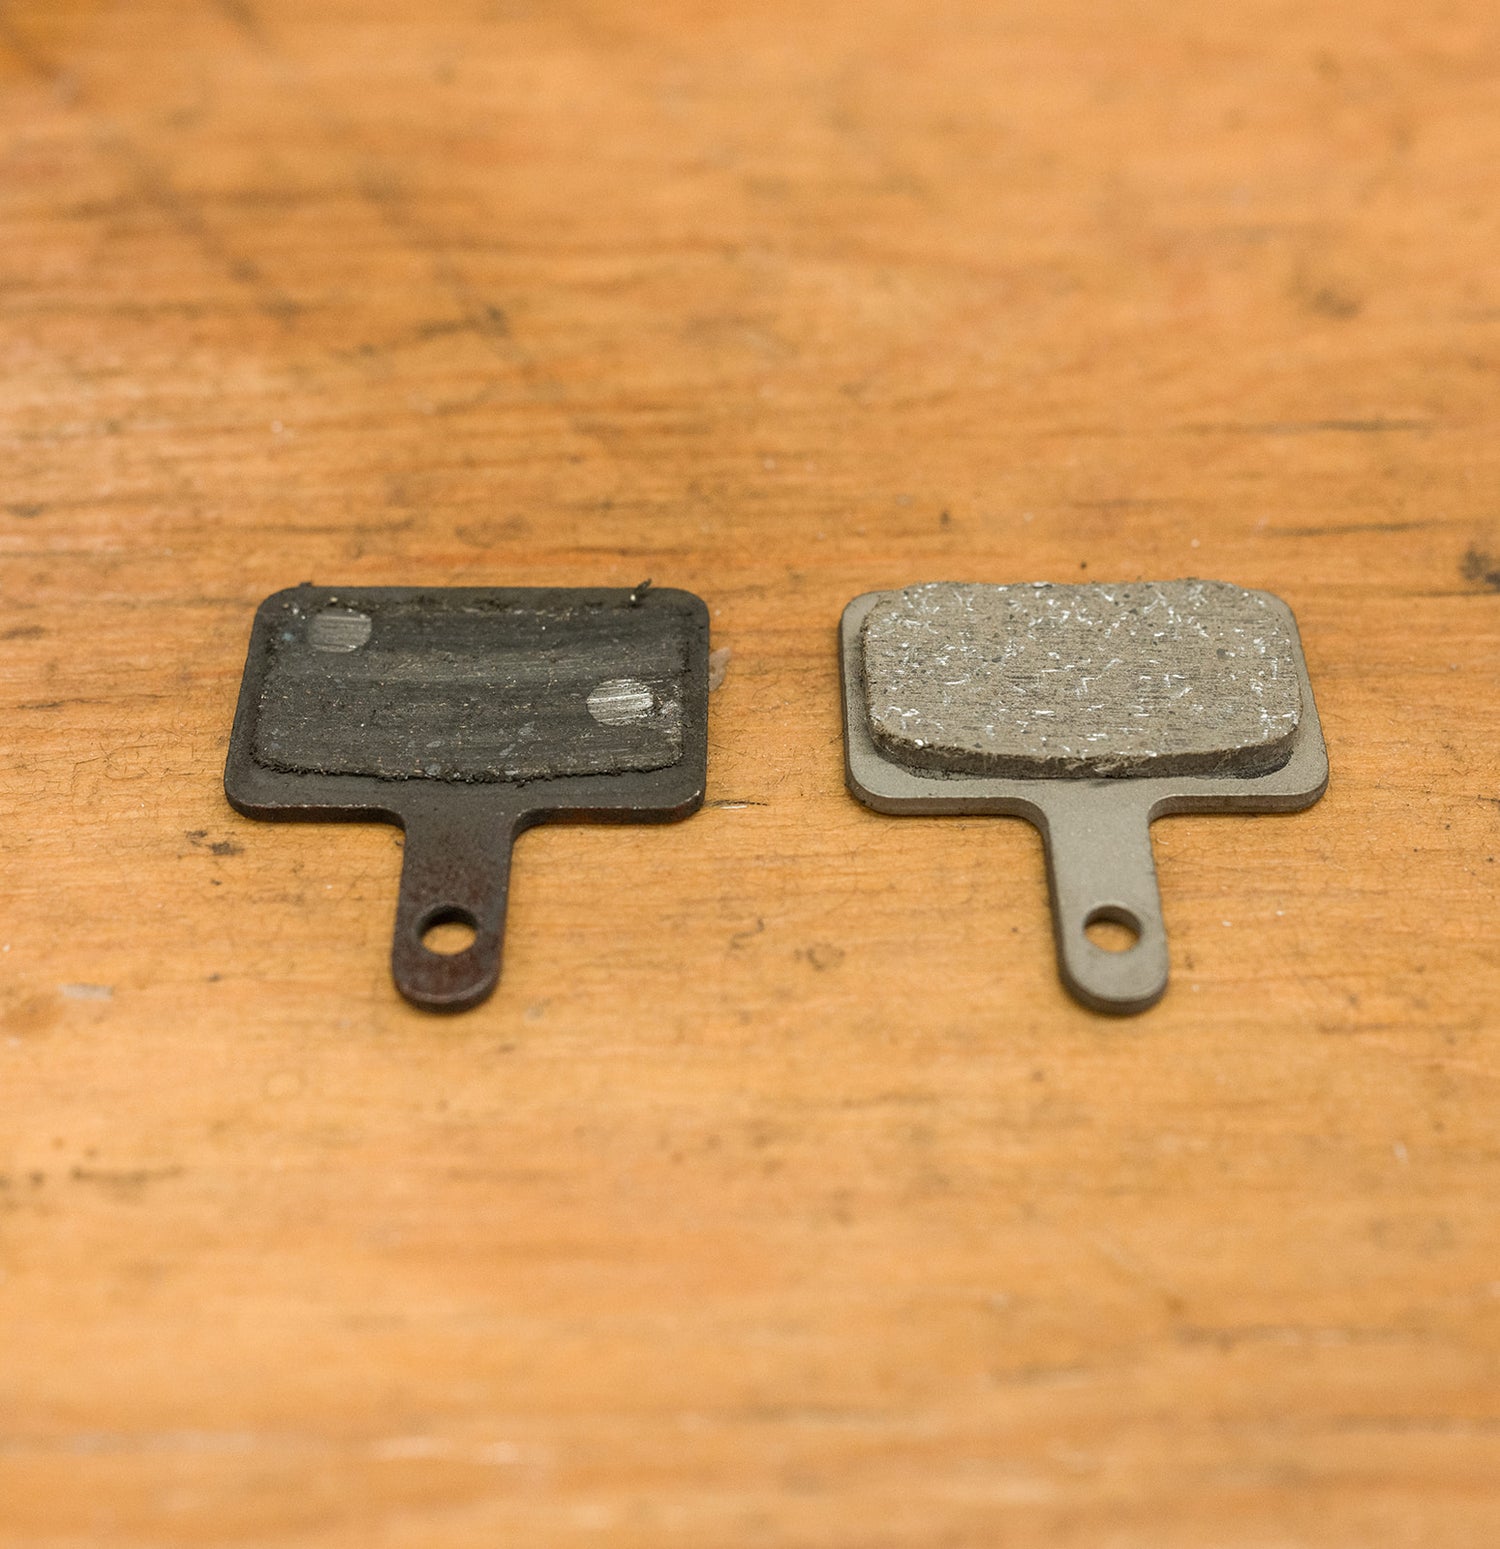 Have you checked your brake pads recently? The one on the left is NOT what you want to see!